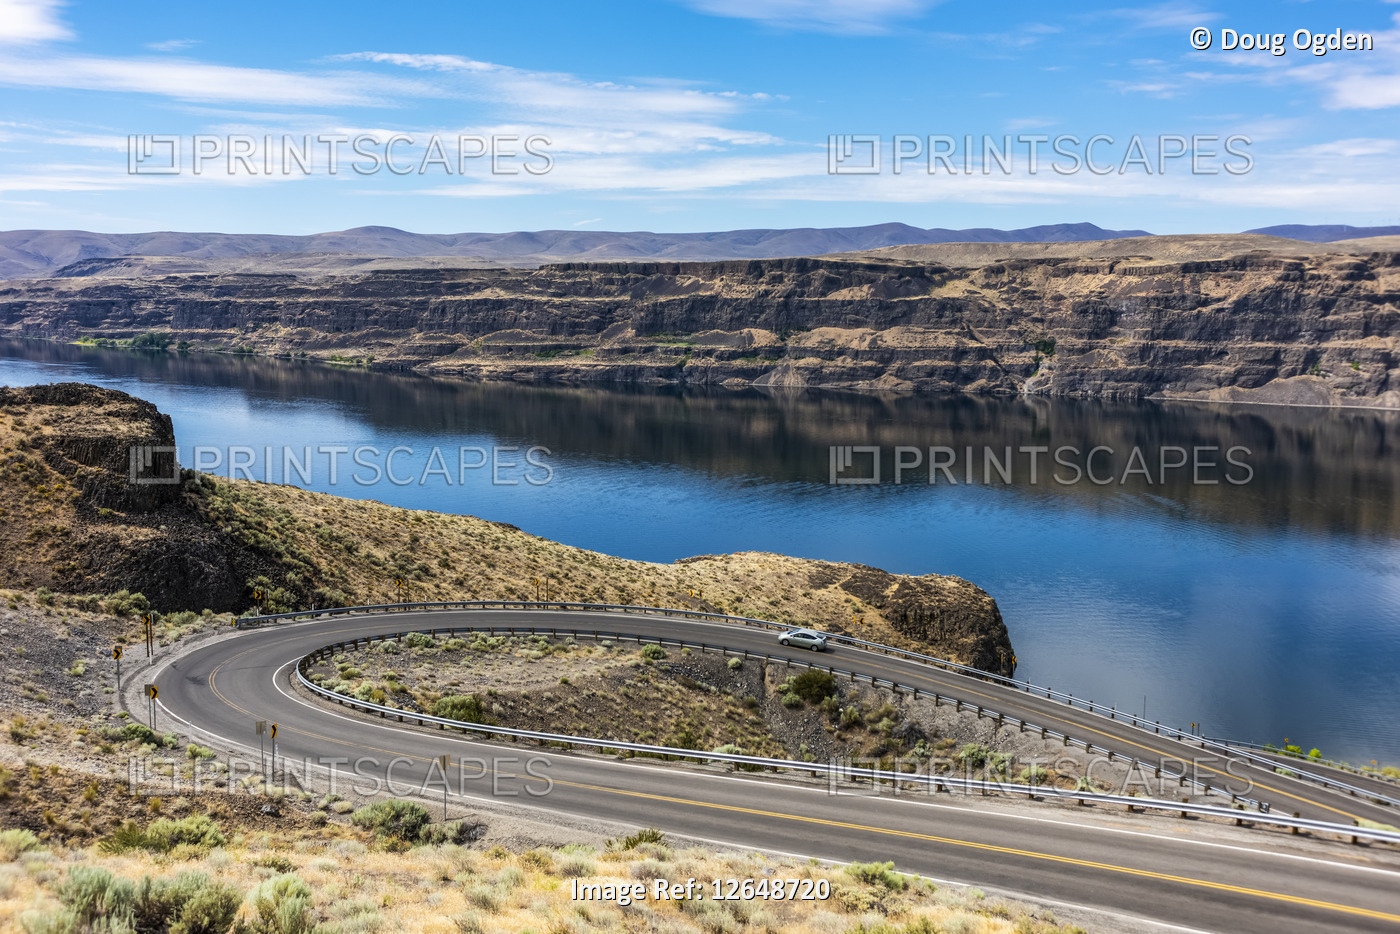 A switchback road leading to the town of Sunland, Washington on the bank of ...